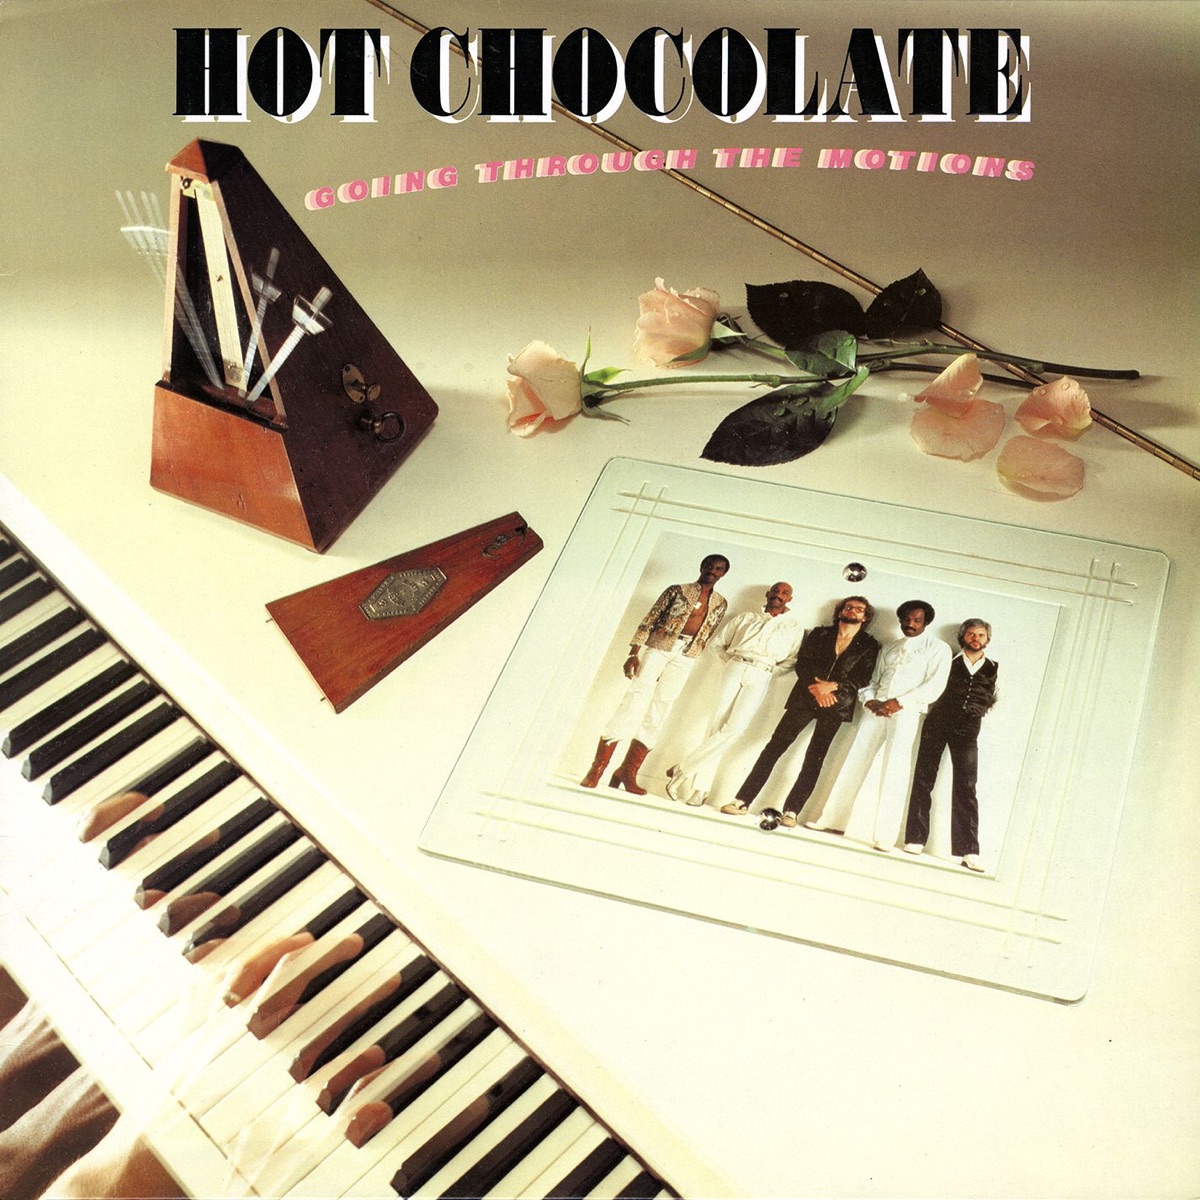 Hot Chocolate Going Through the Motions cover artwork